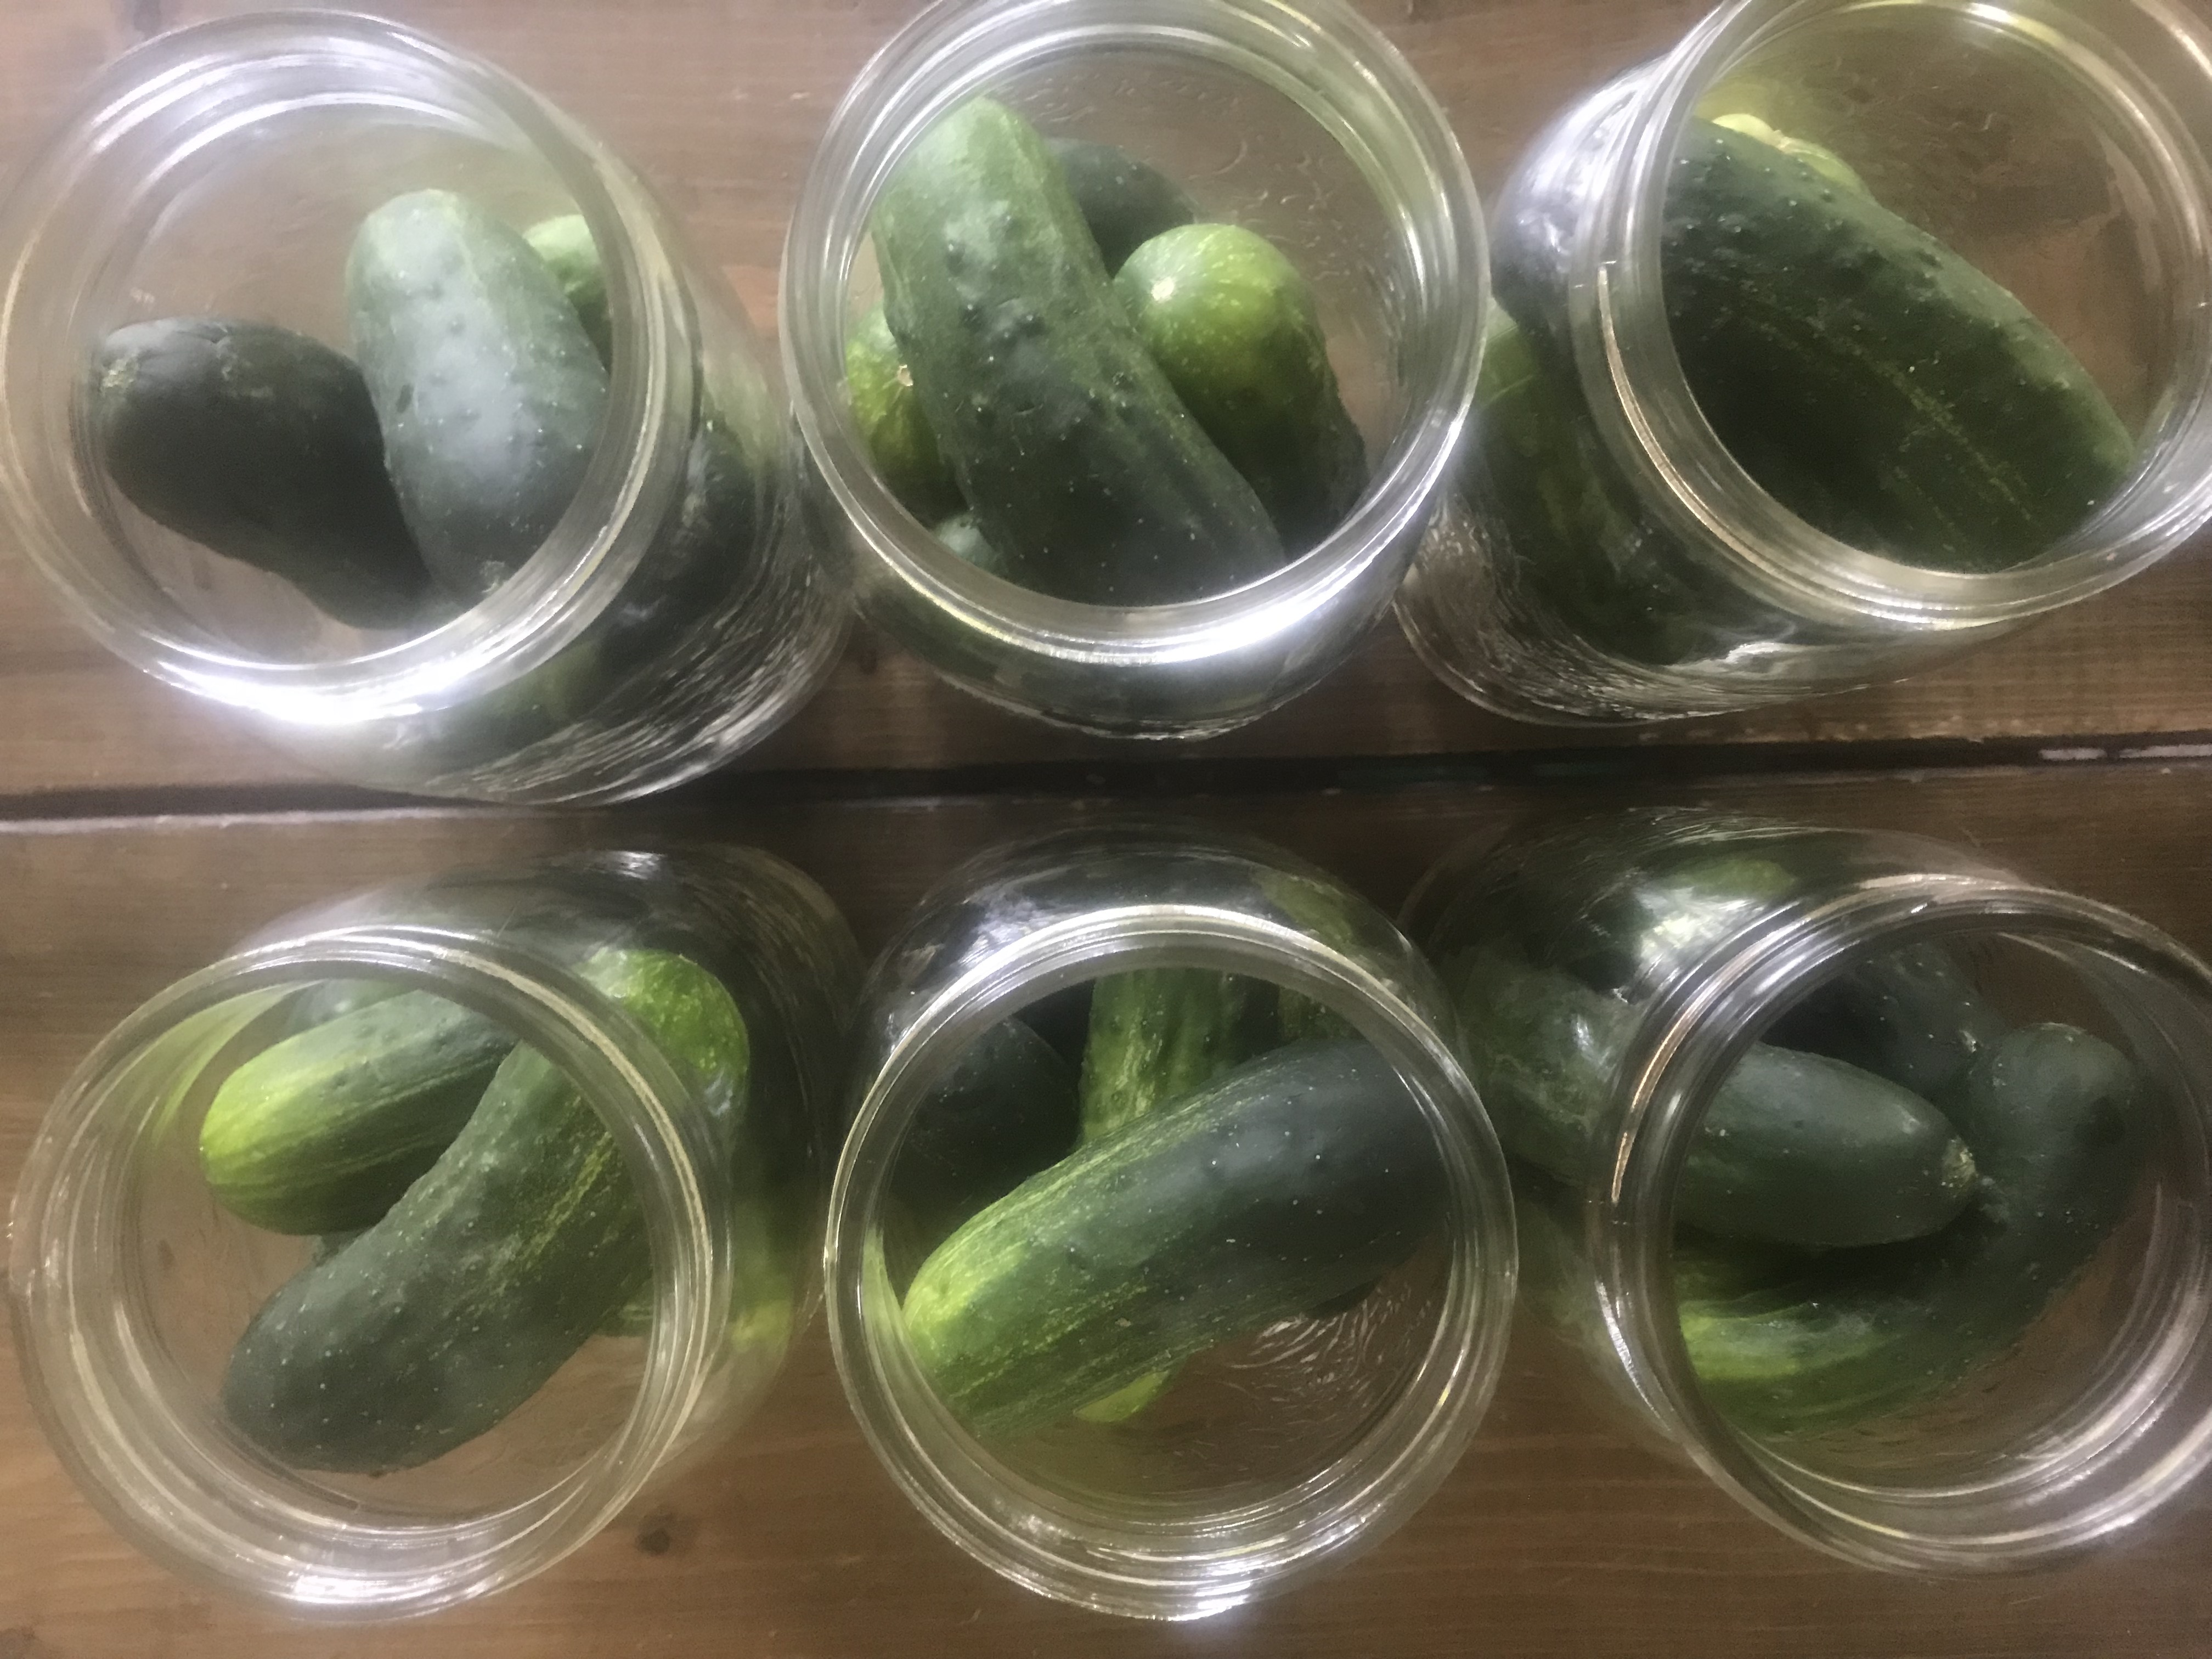 Lacto-fermented Dill Pickles